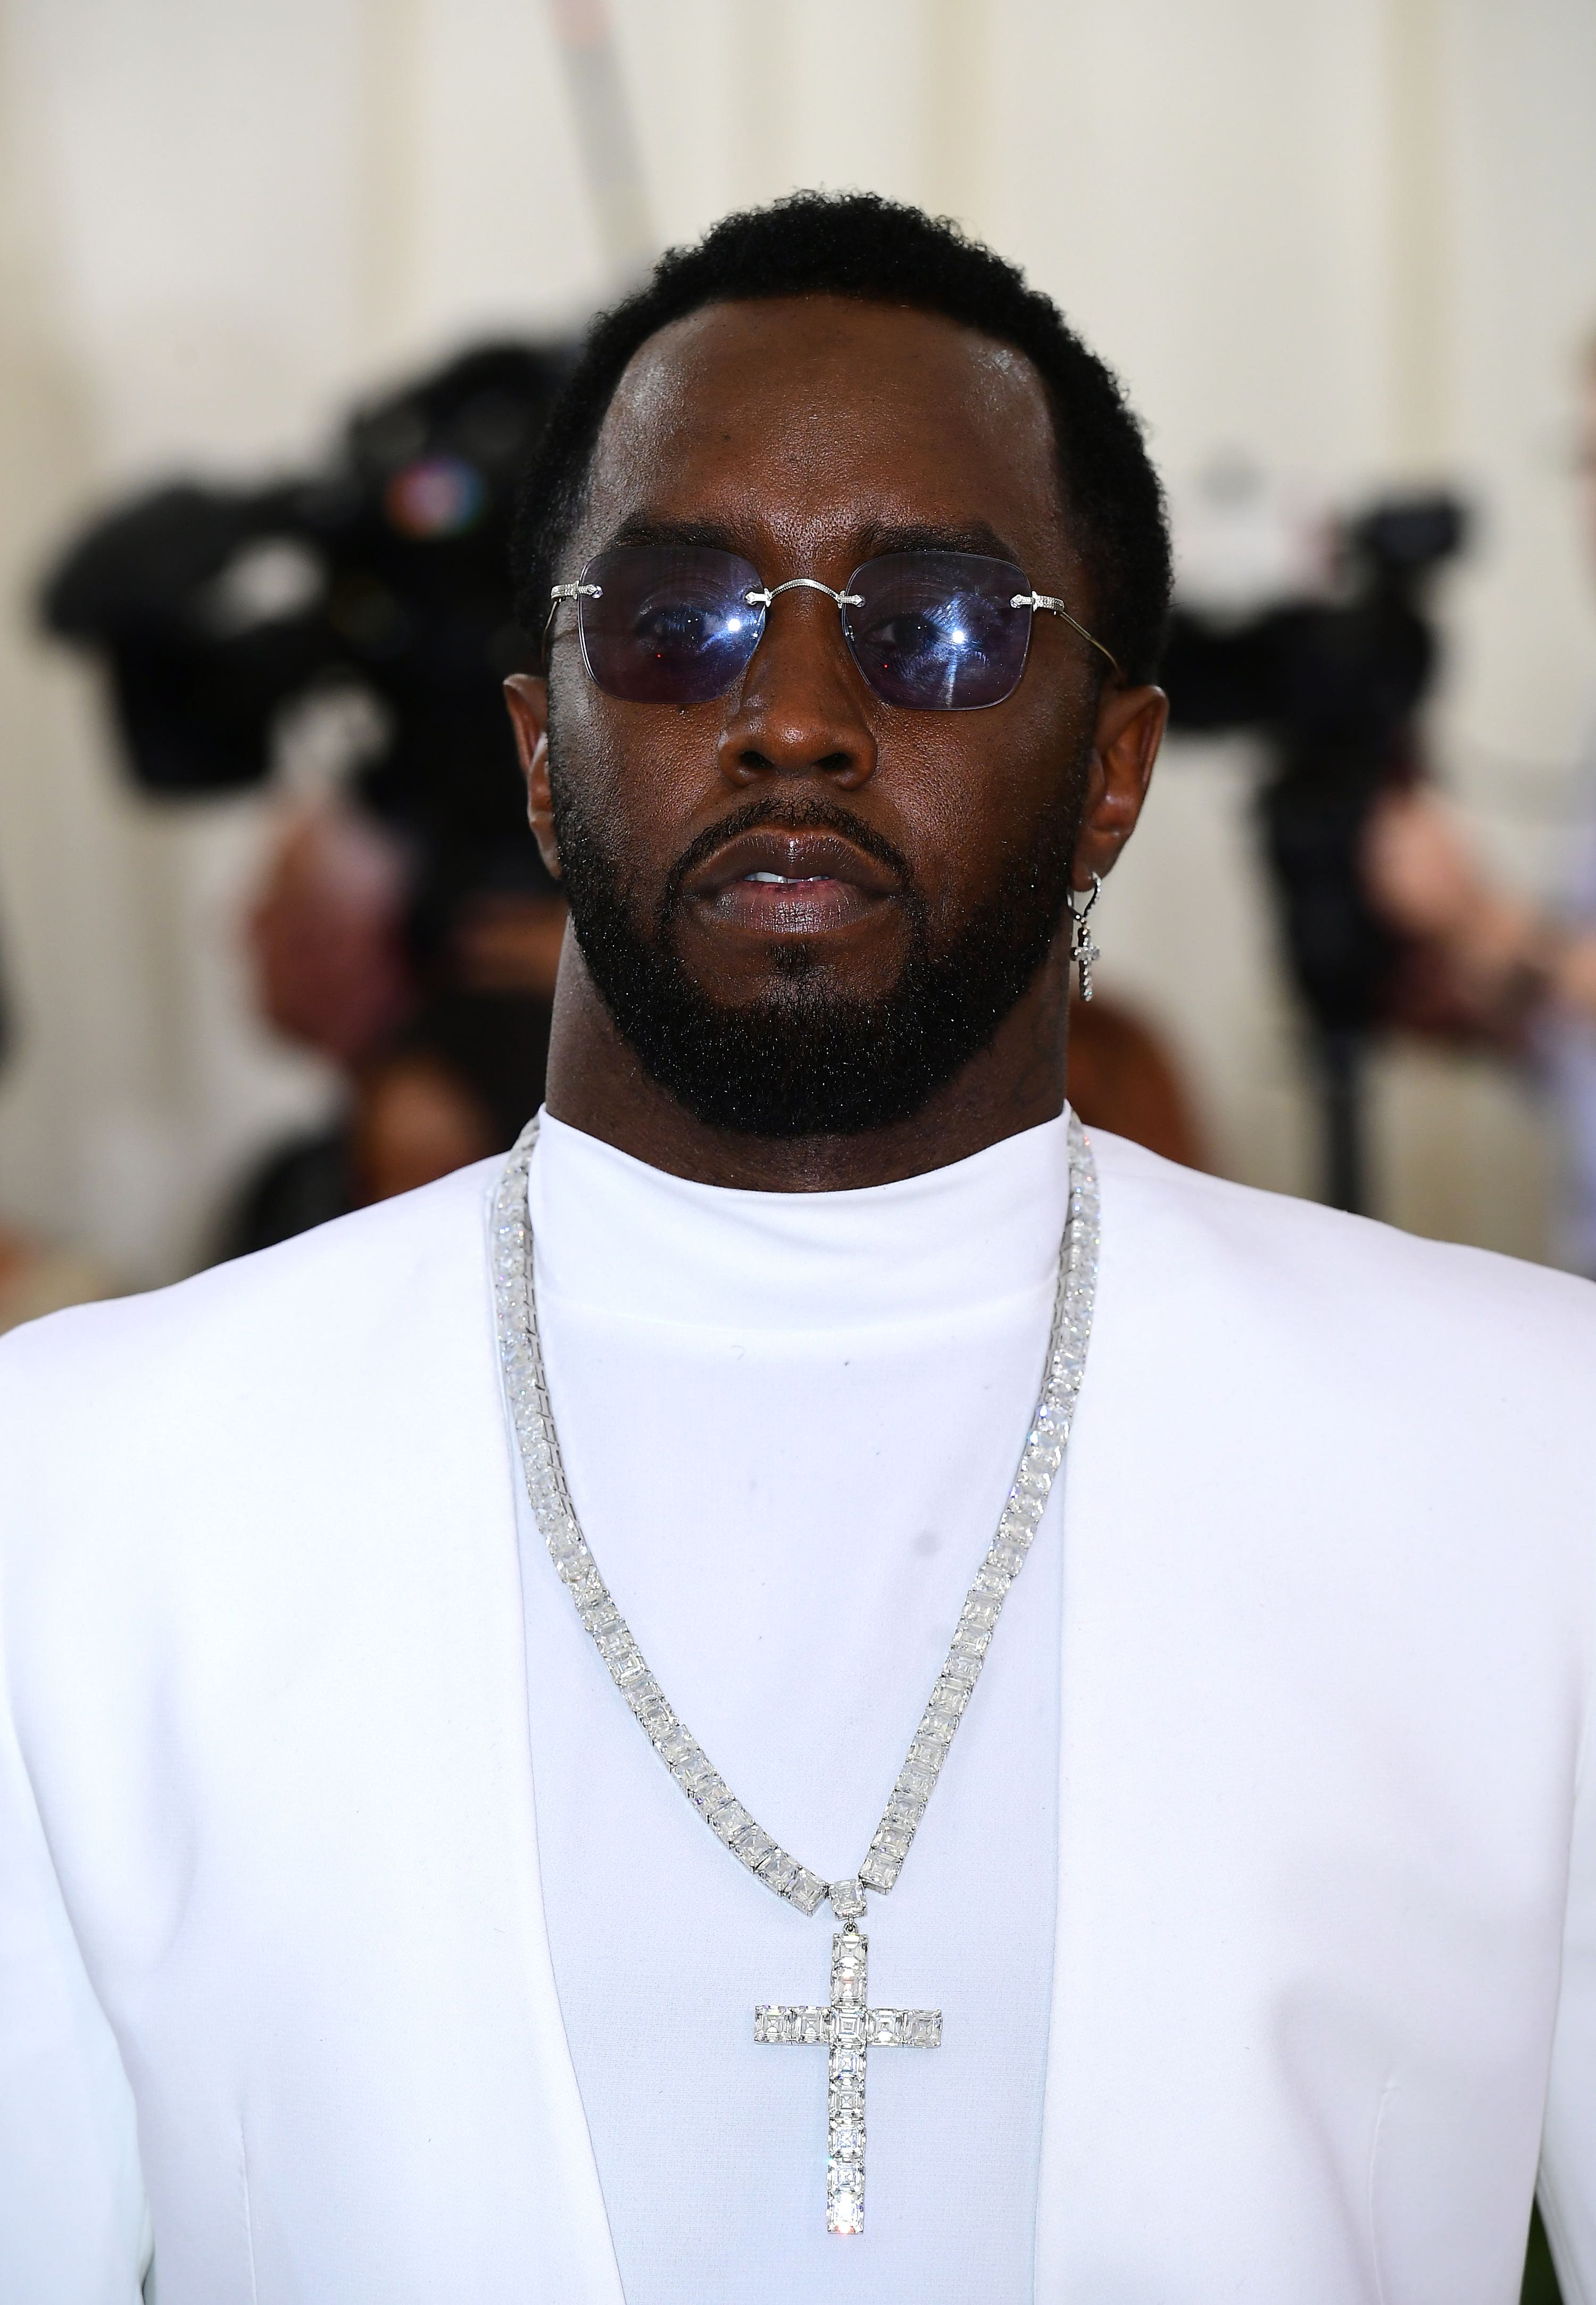 Sean Combs has settled a lawsuit with former partner Cassie.